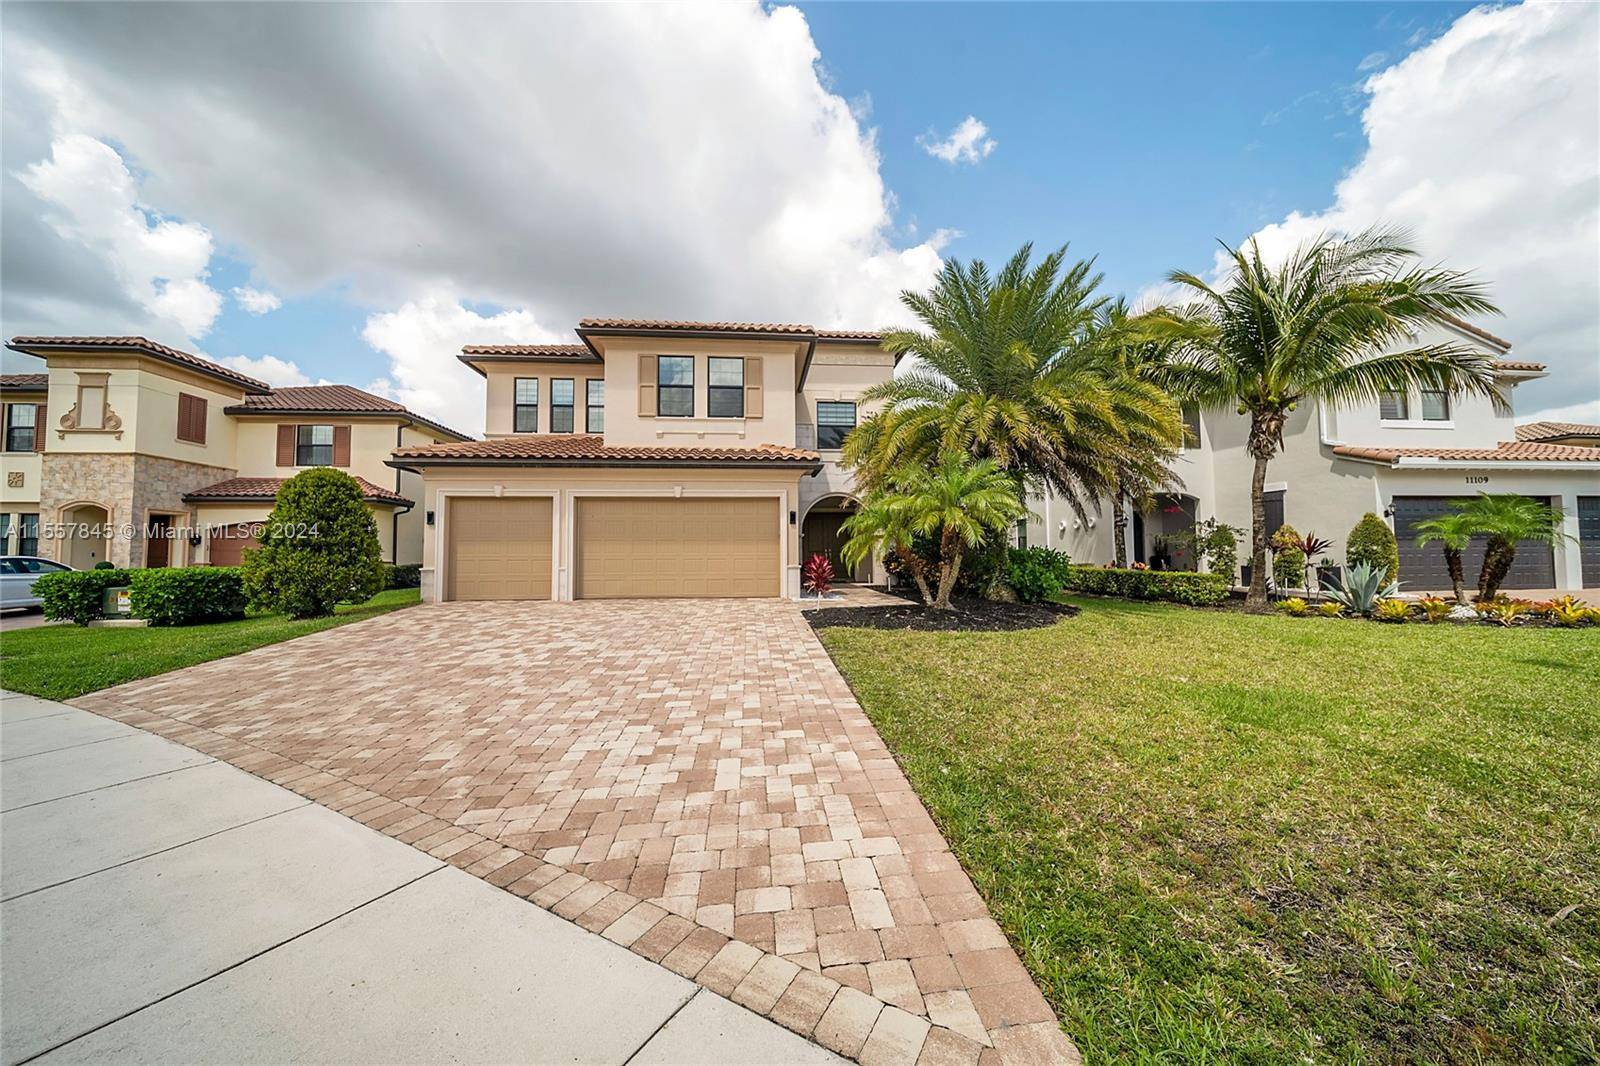 Magnificent 5 beds 4 bath spacious residence in the affluent city of Parkland, FL.